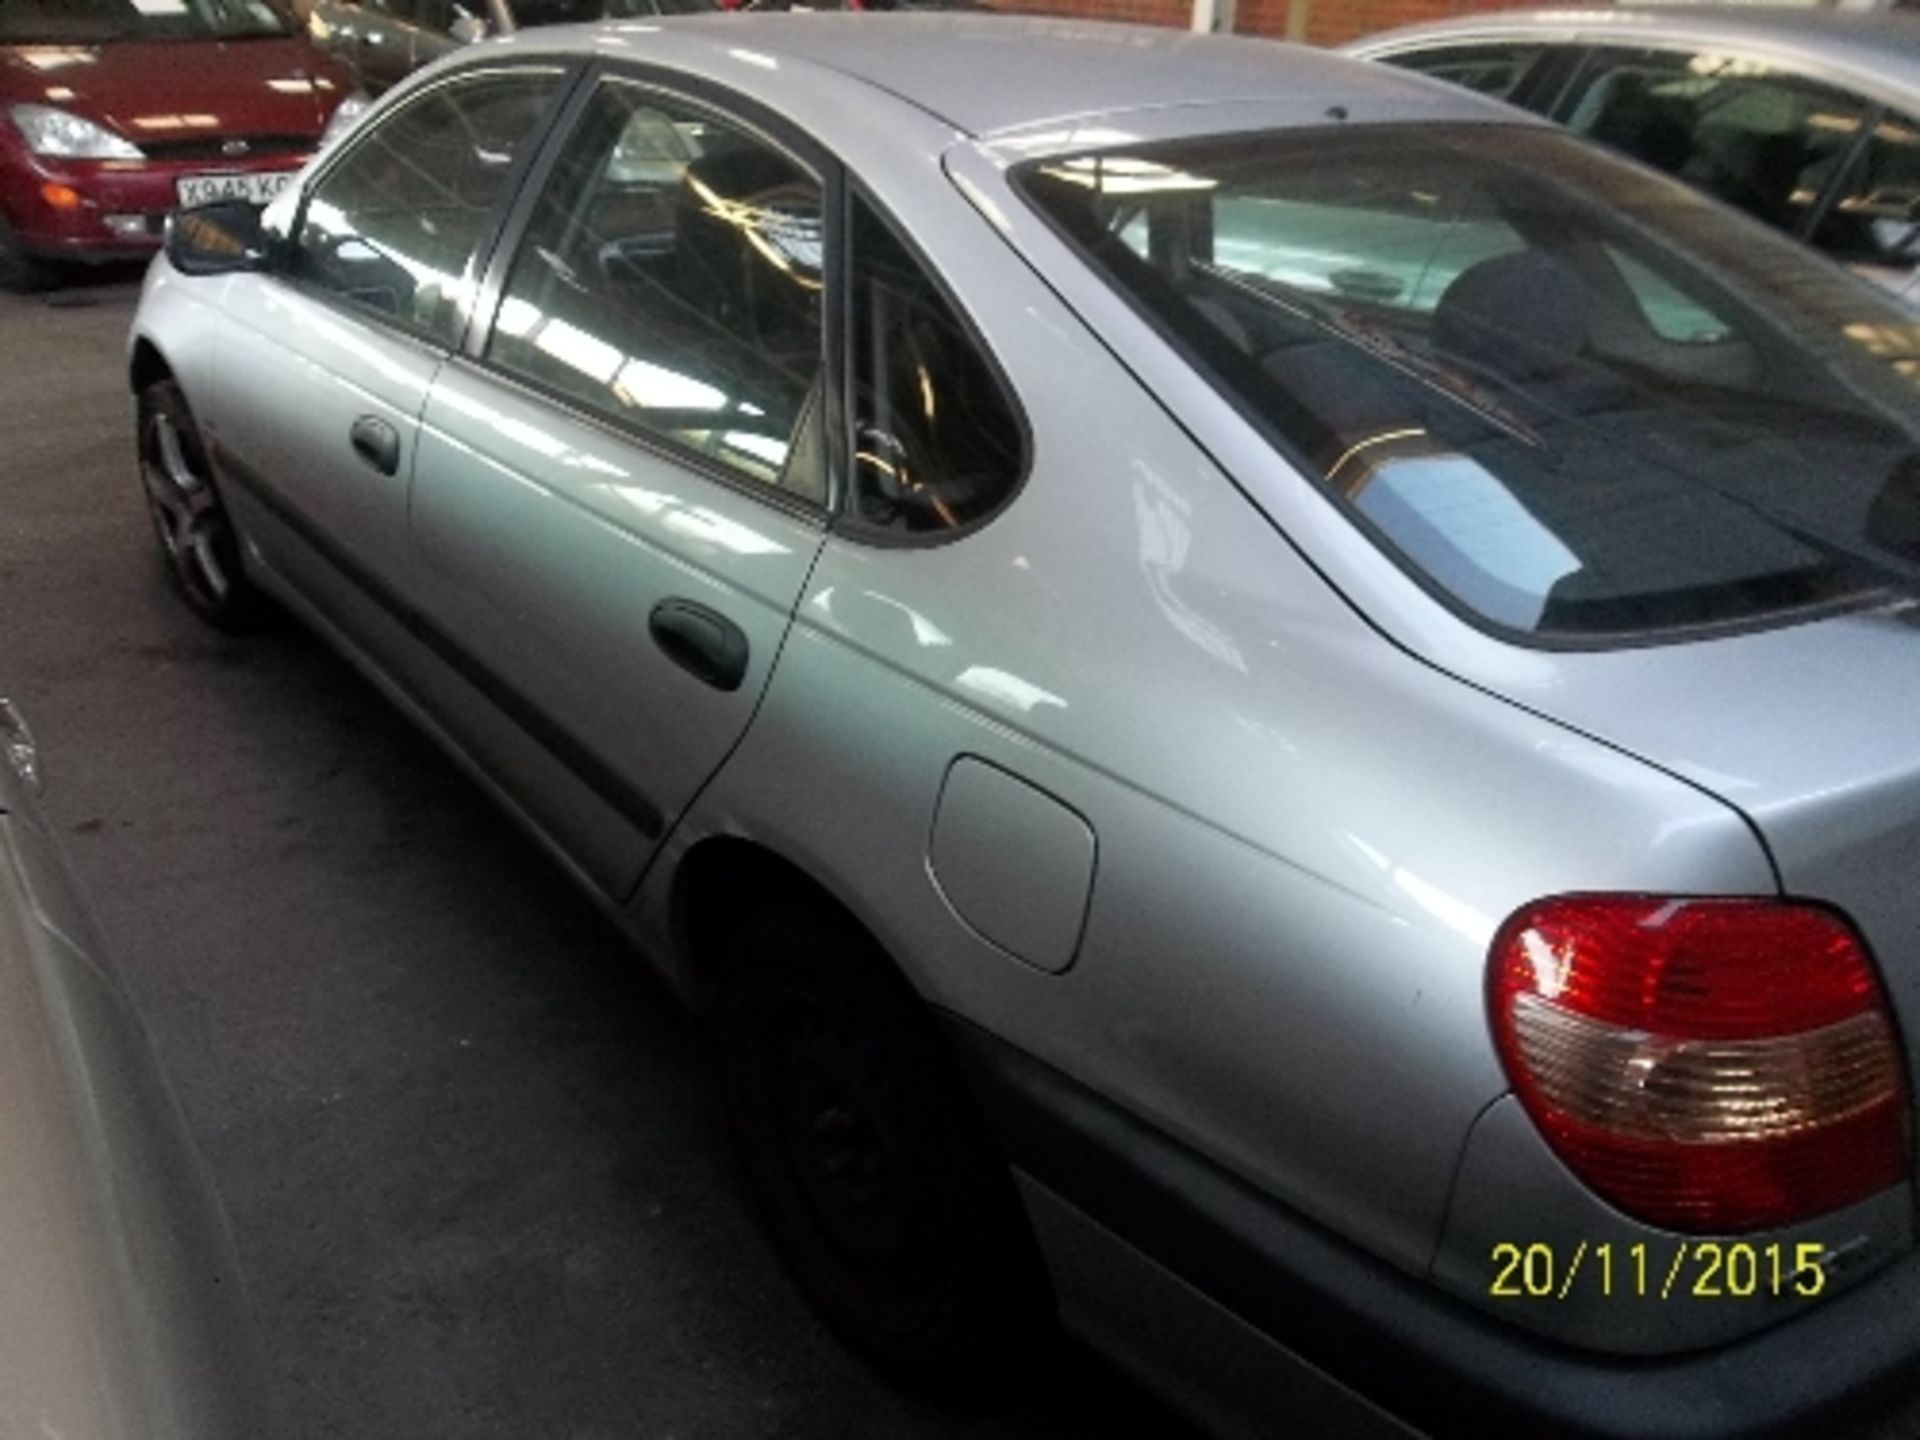 Toyota Avensis Vermont -GU52 DJY Date of registration: 30.09.2002 1794cc, petrol, manual, silver - Image 4 of 4